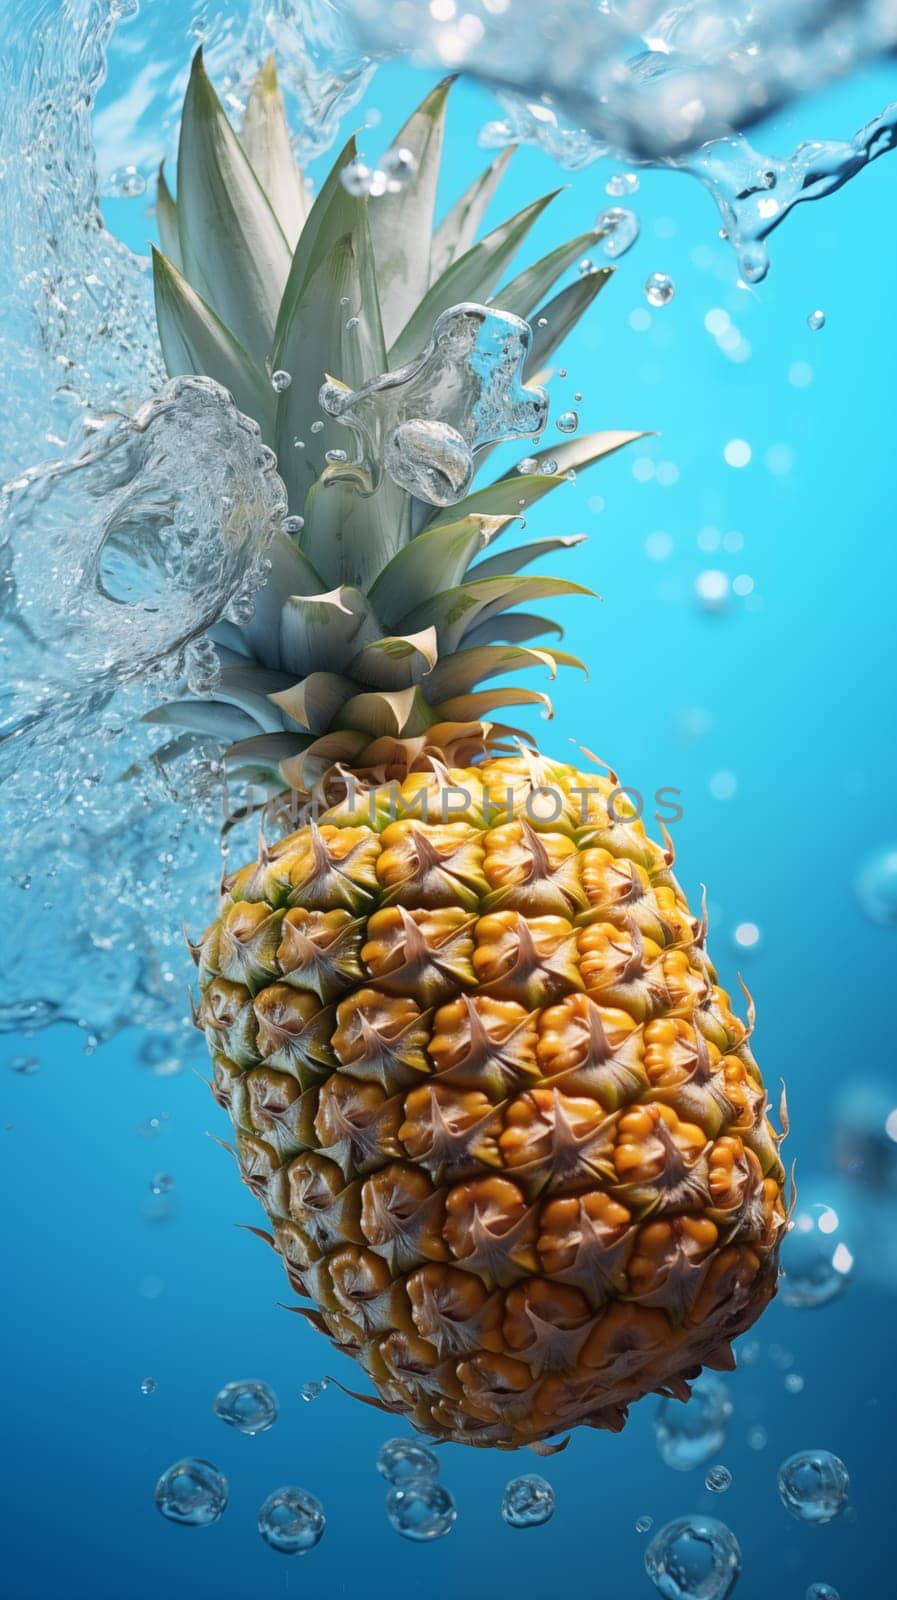 Fresh pineapple under light-blue water, with splashes and air bubbles by Zakharova